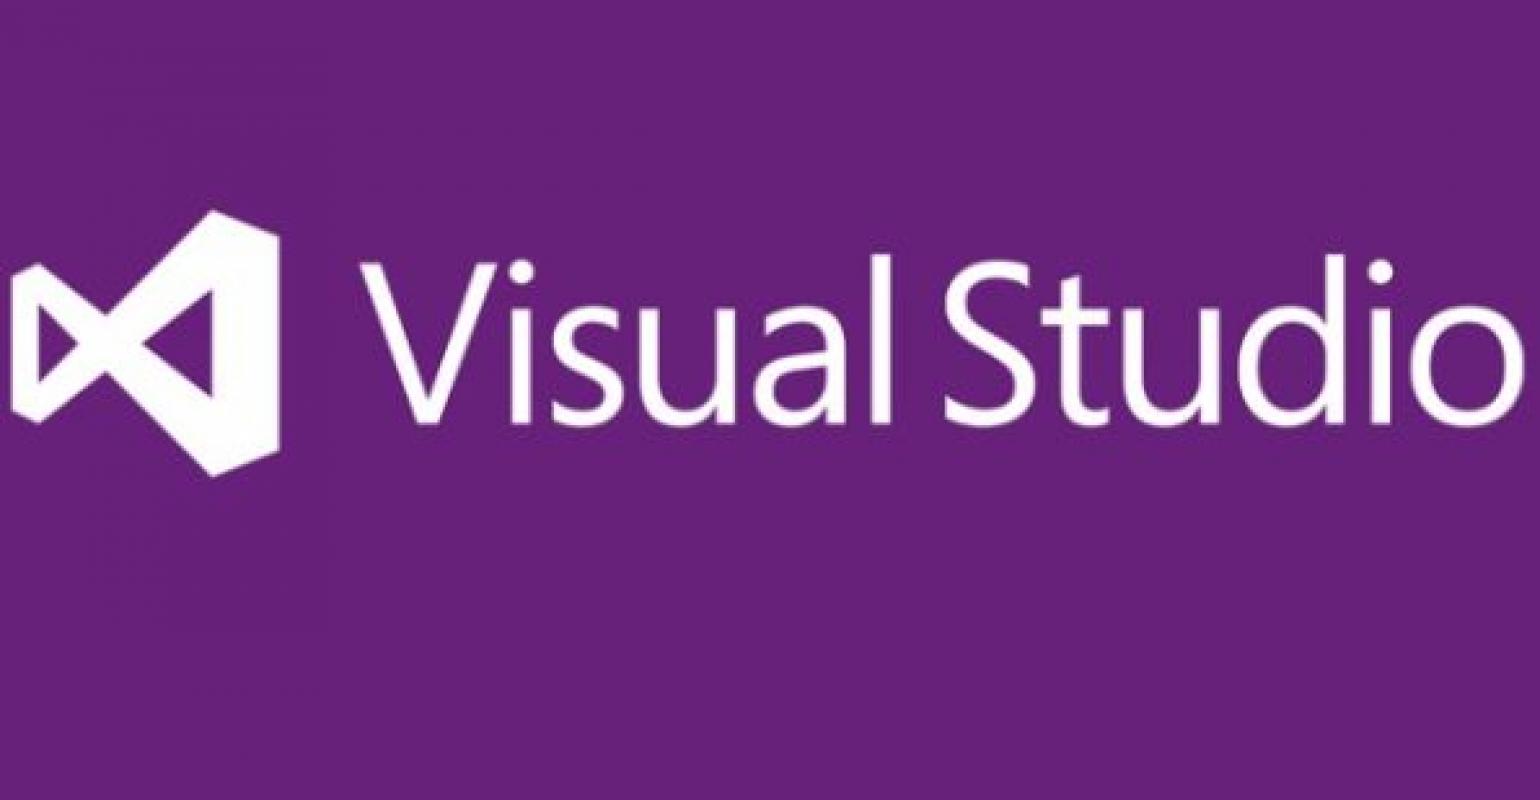 Visual Studio 2013 and .NET Framework  | ITPro Today: IT News,  How-Tos, Trends, Case Studies, Career Tips, More